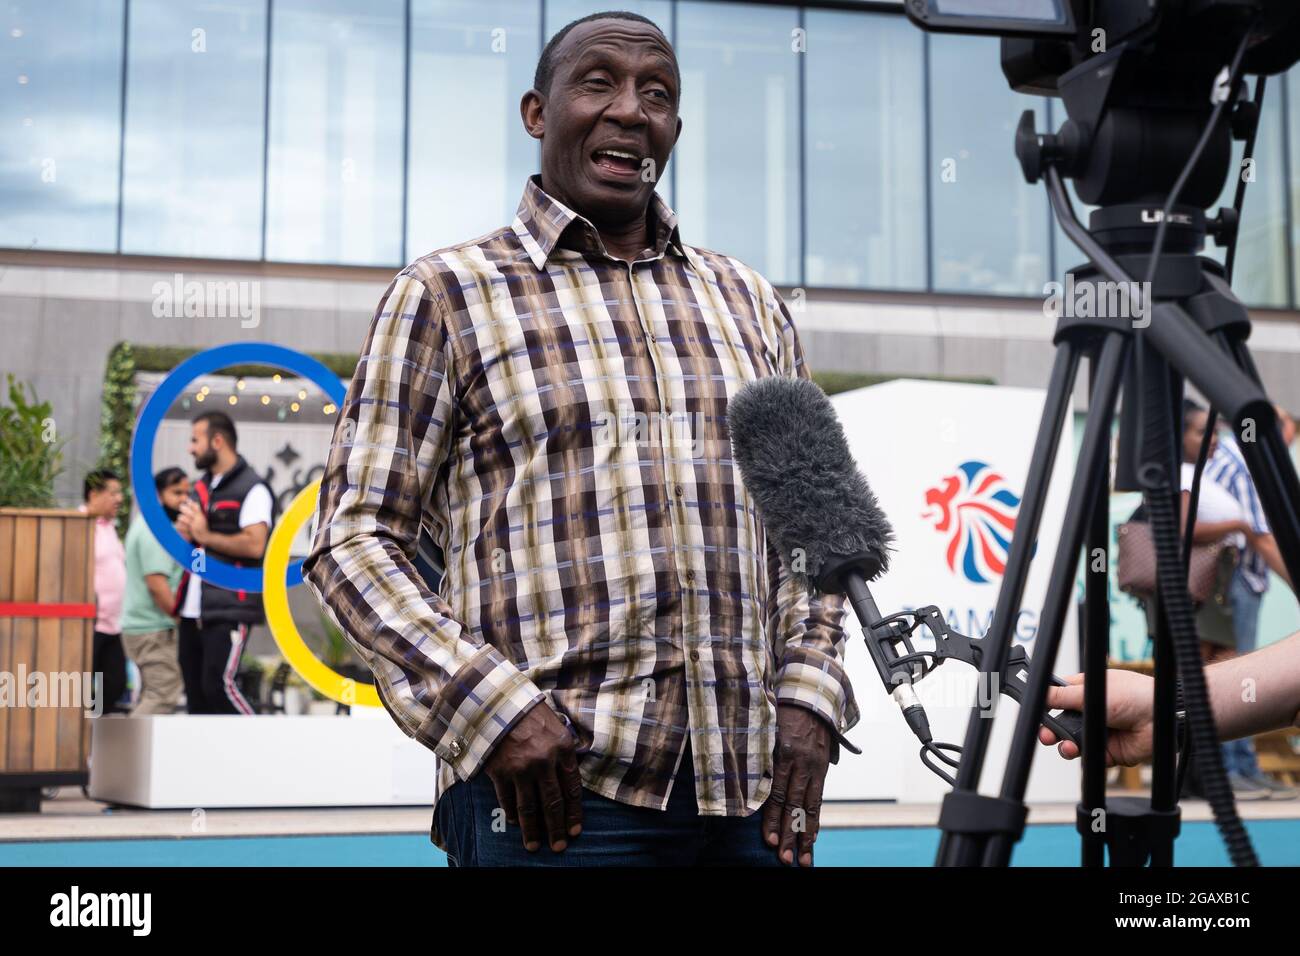 LONDON, UK. JULY 31ST. Linford Christie at the Tokyo 2020 Olympics fanzone area at Westfield London on July 31st 2021 in London, England. (Credit: Tejas Sandhu | MI News) Stock Photo